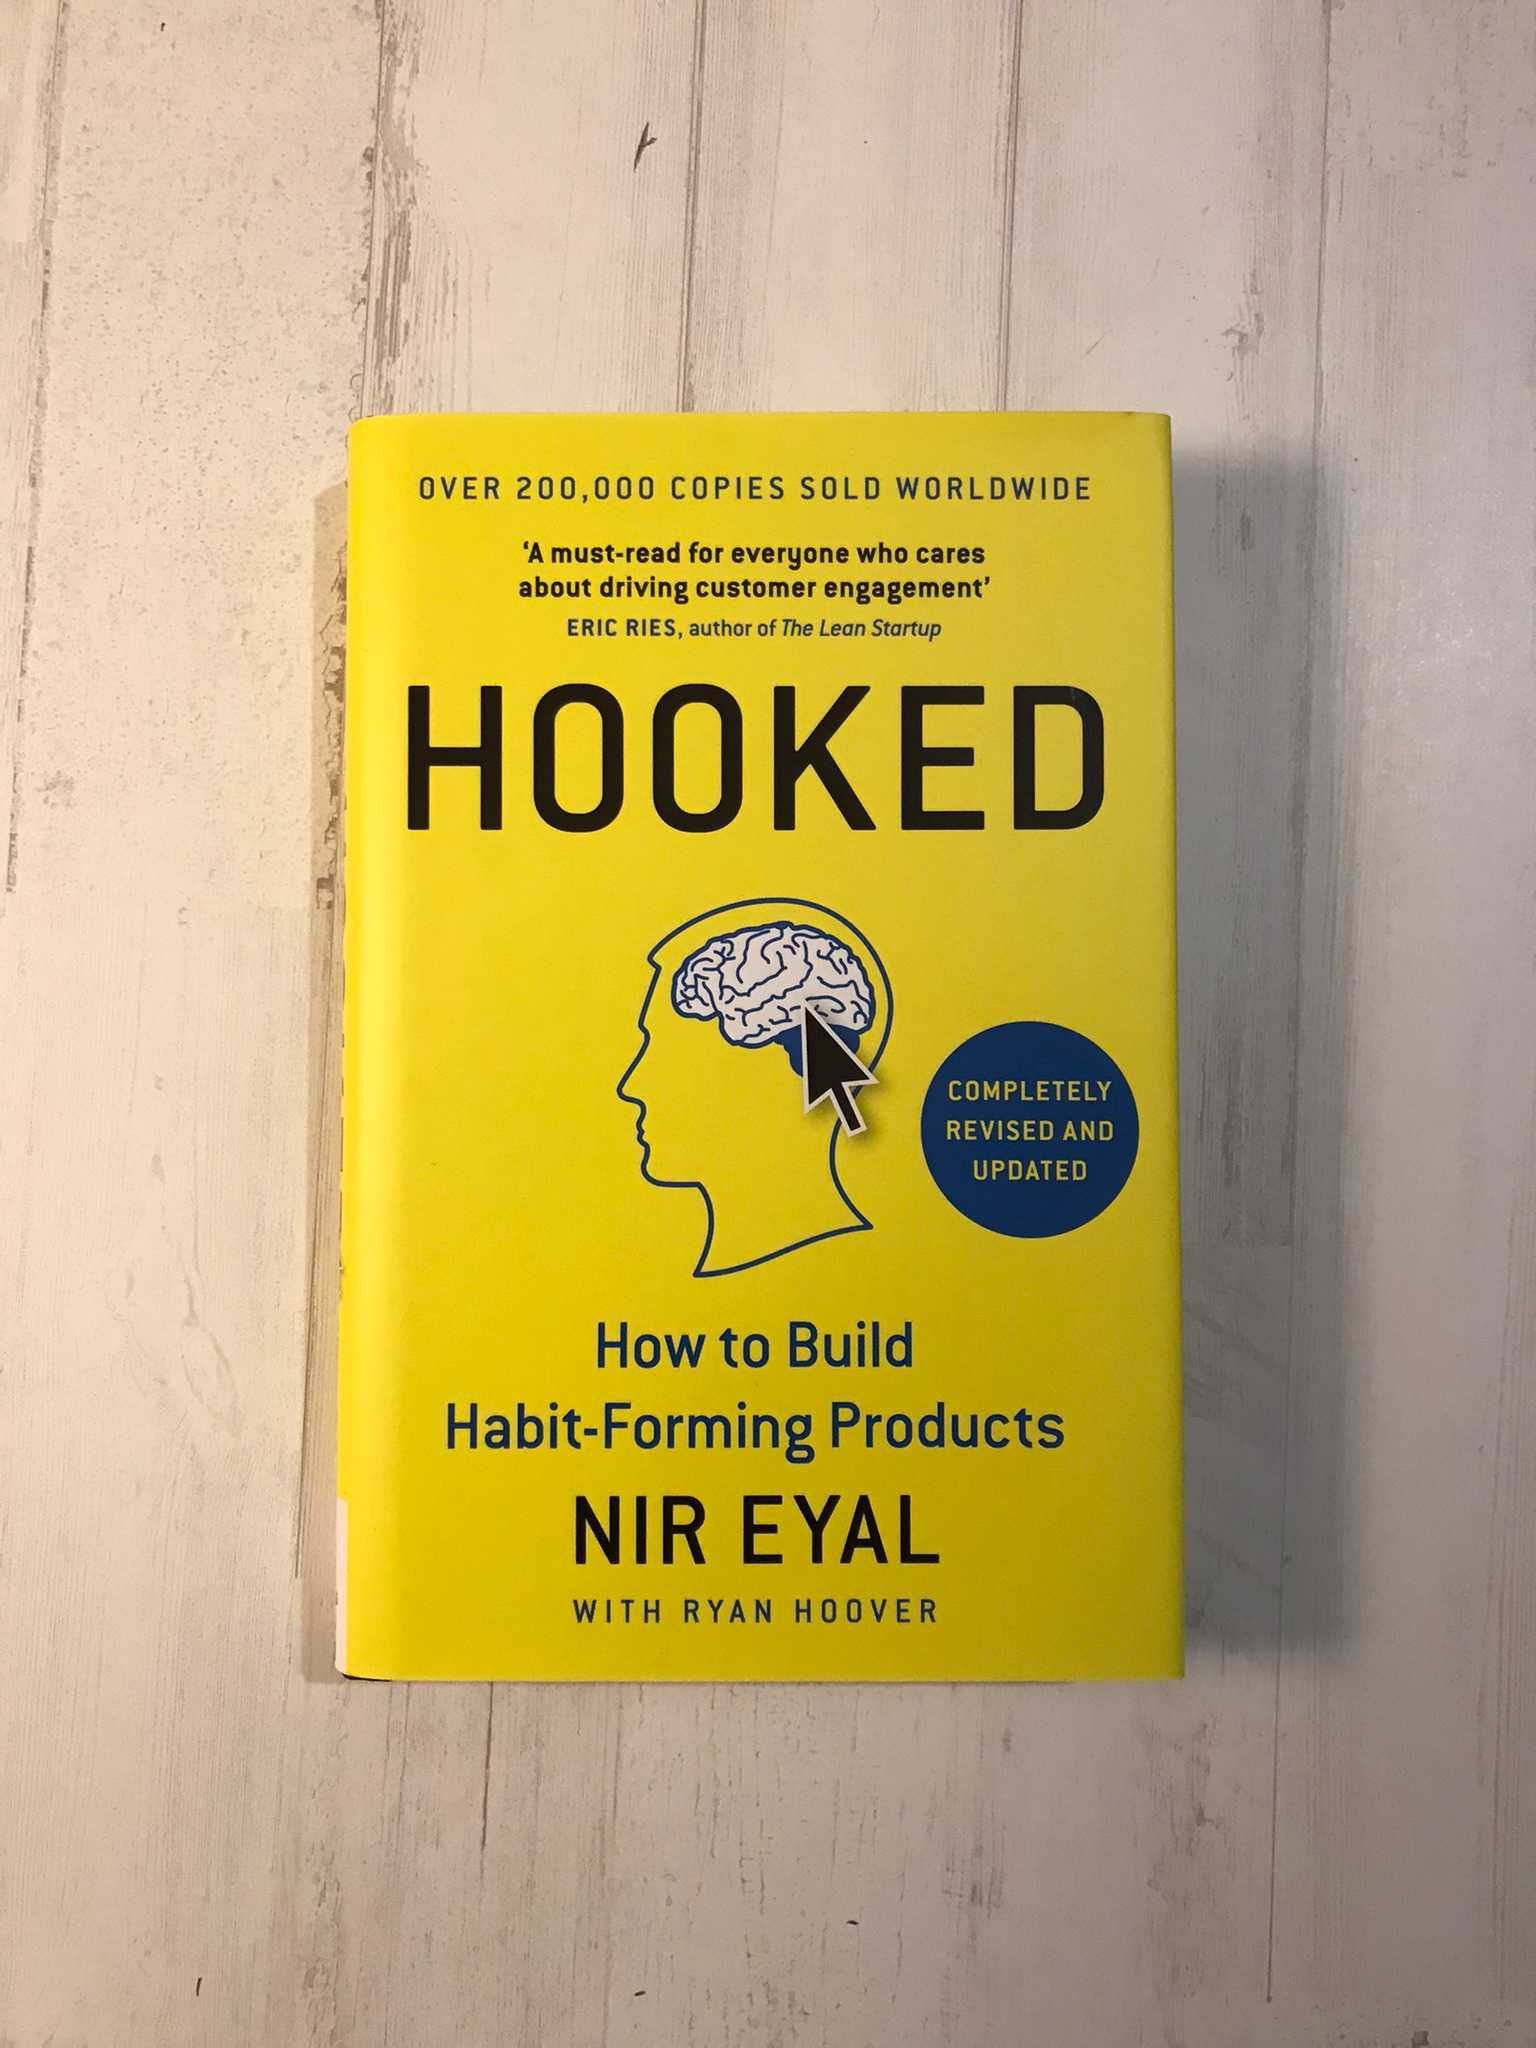 Livro hooked how to build habit-forming products